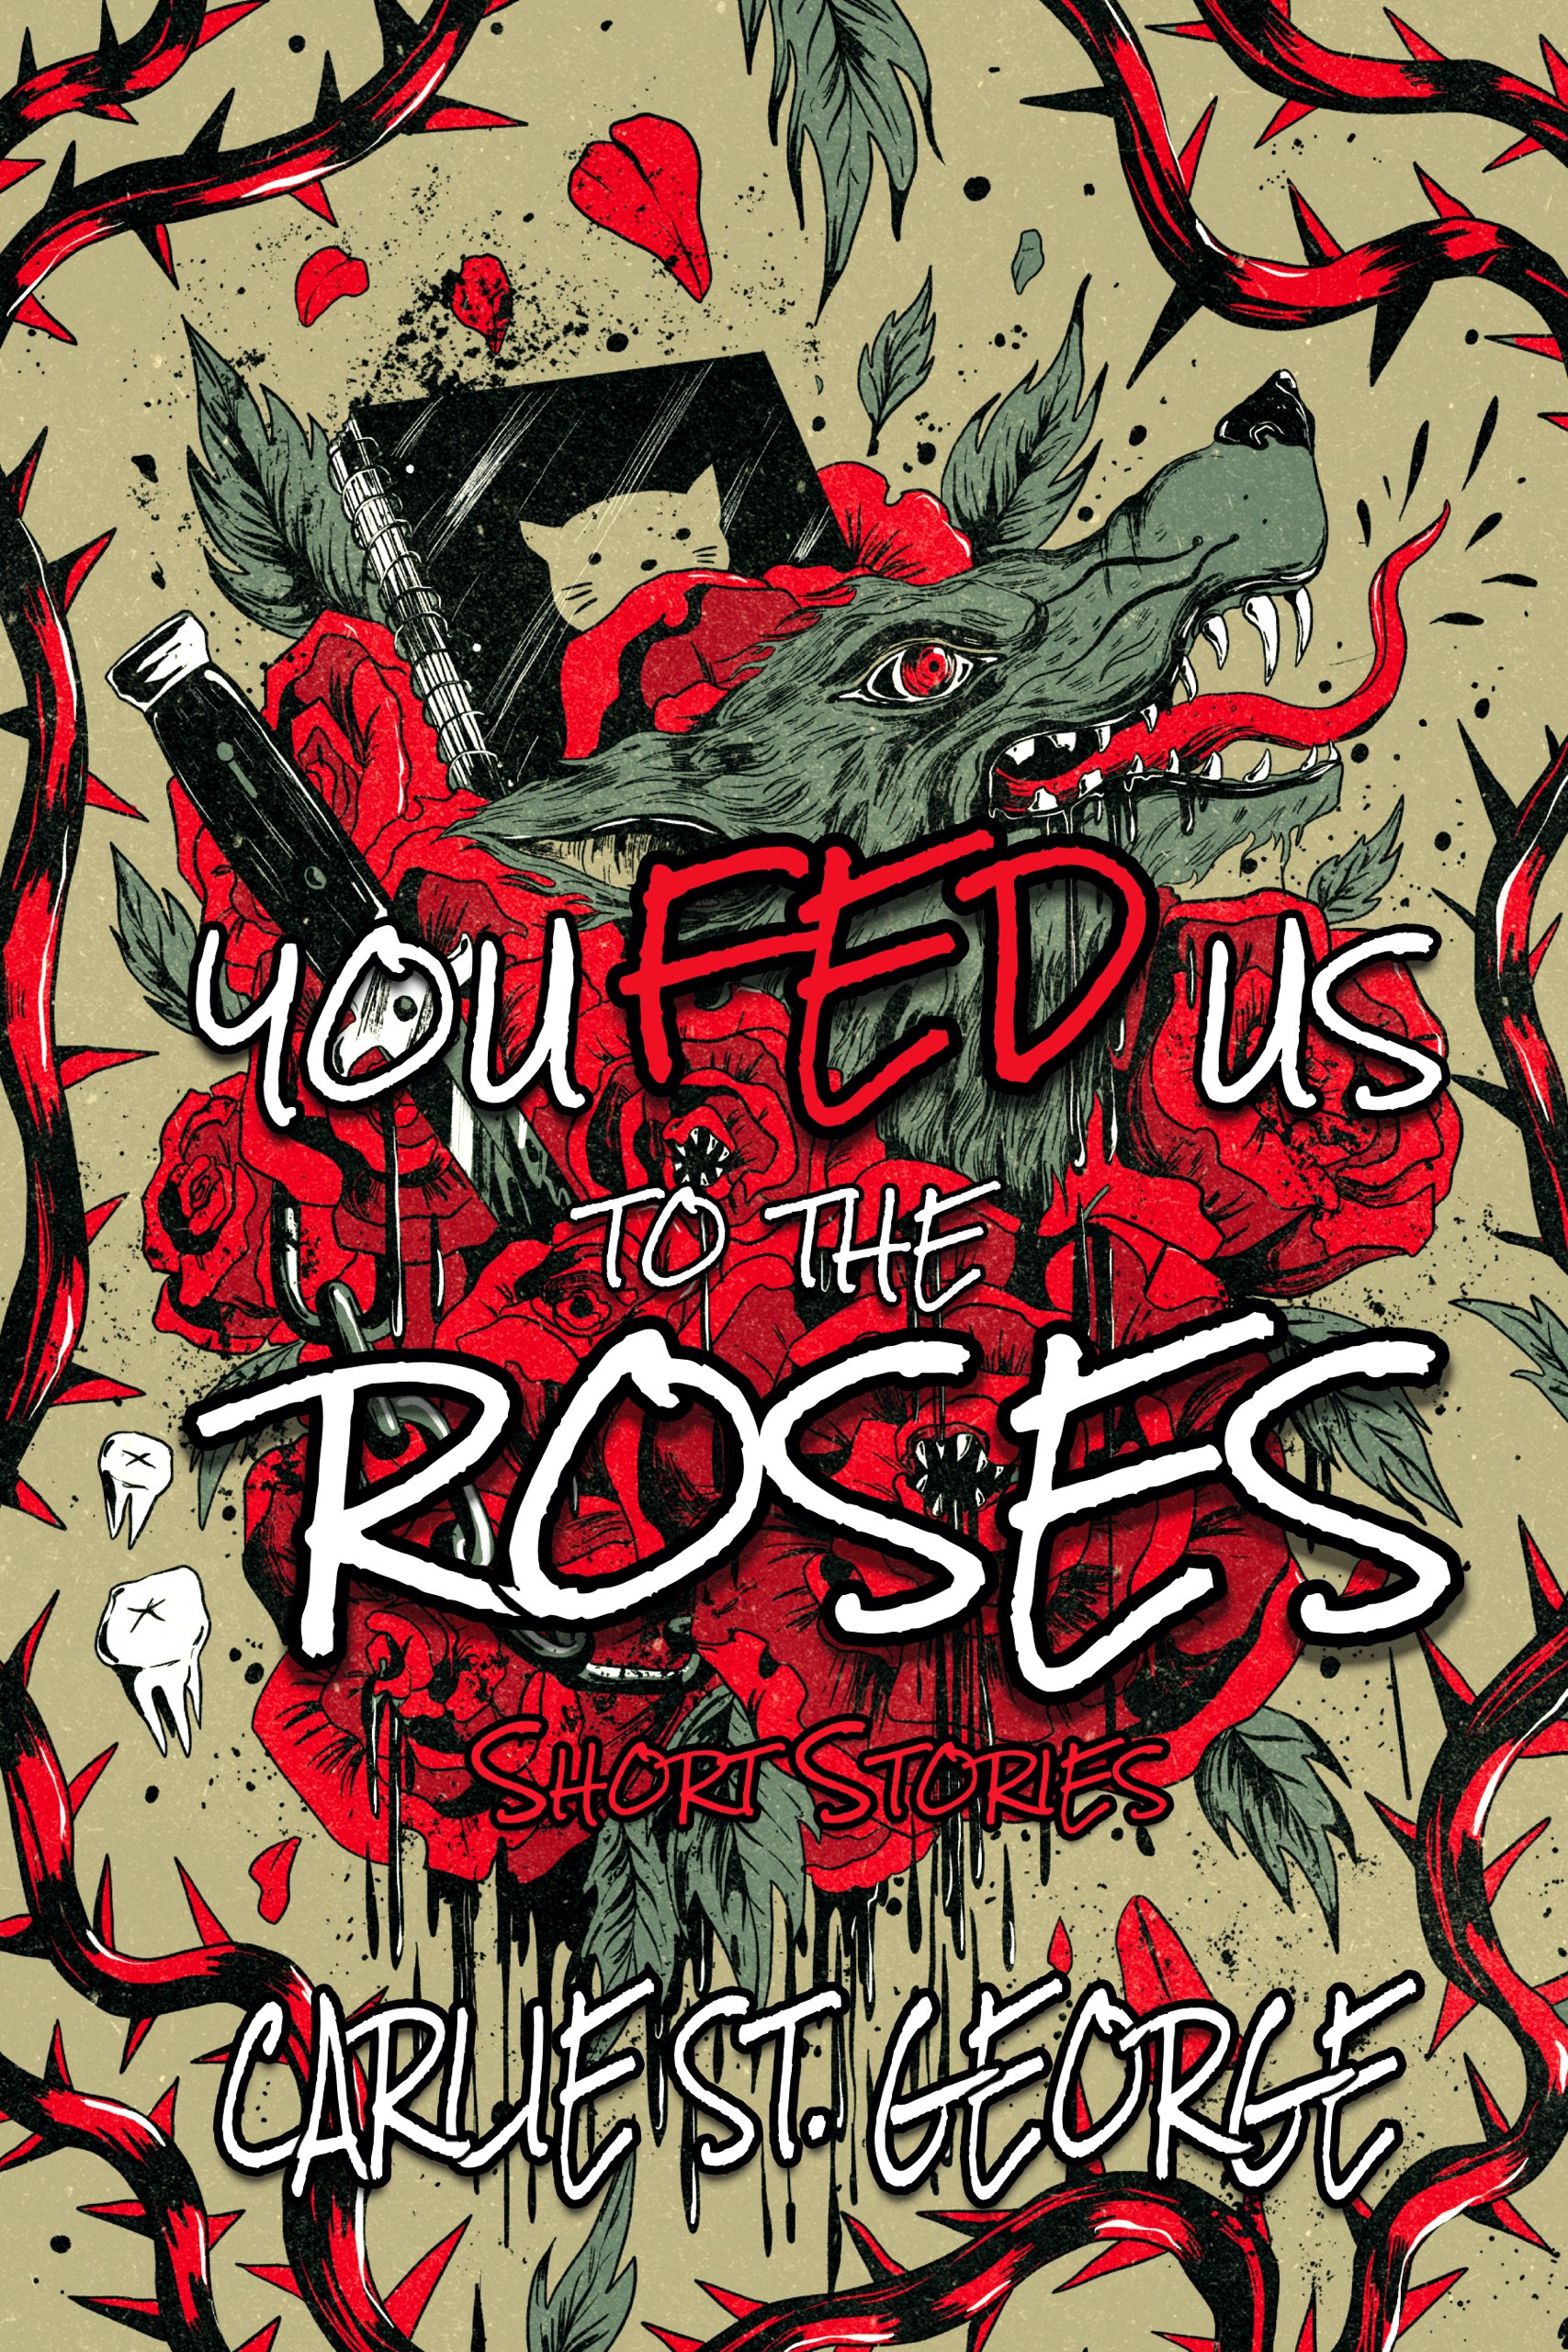 Cover art for You Fed Us to the Roses